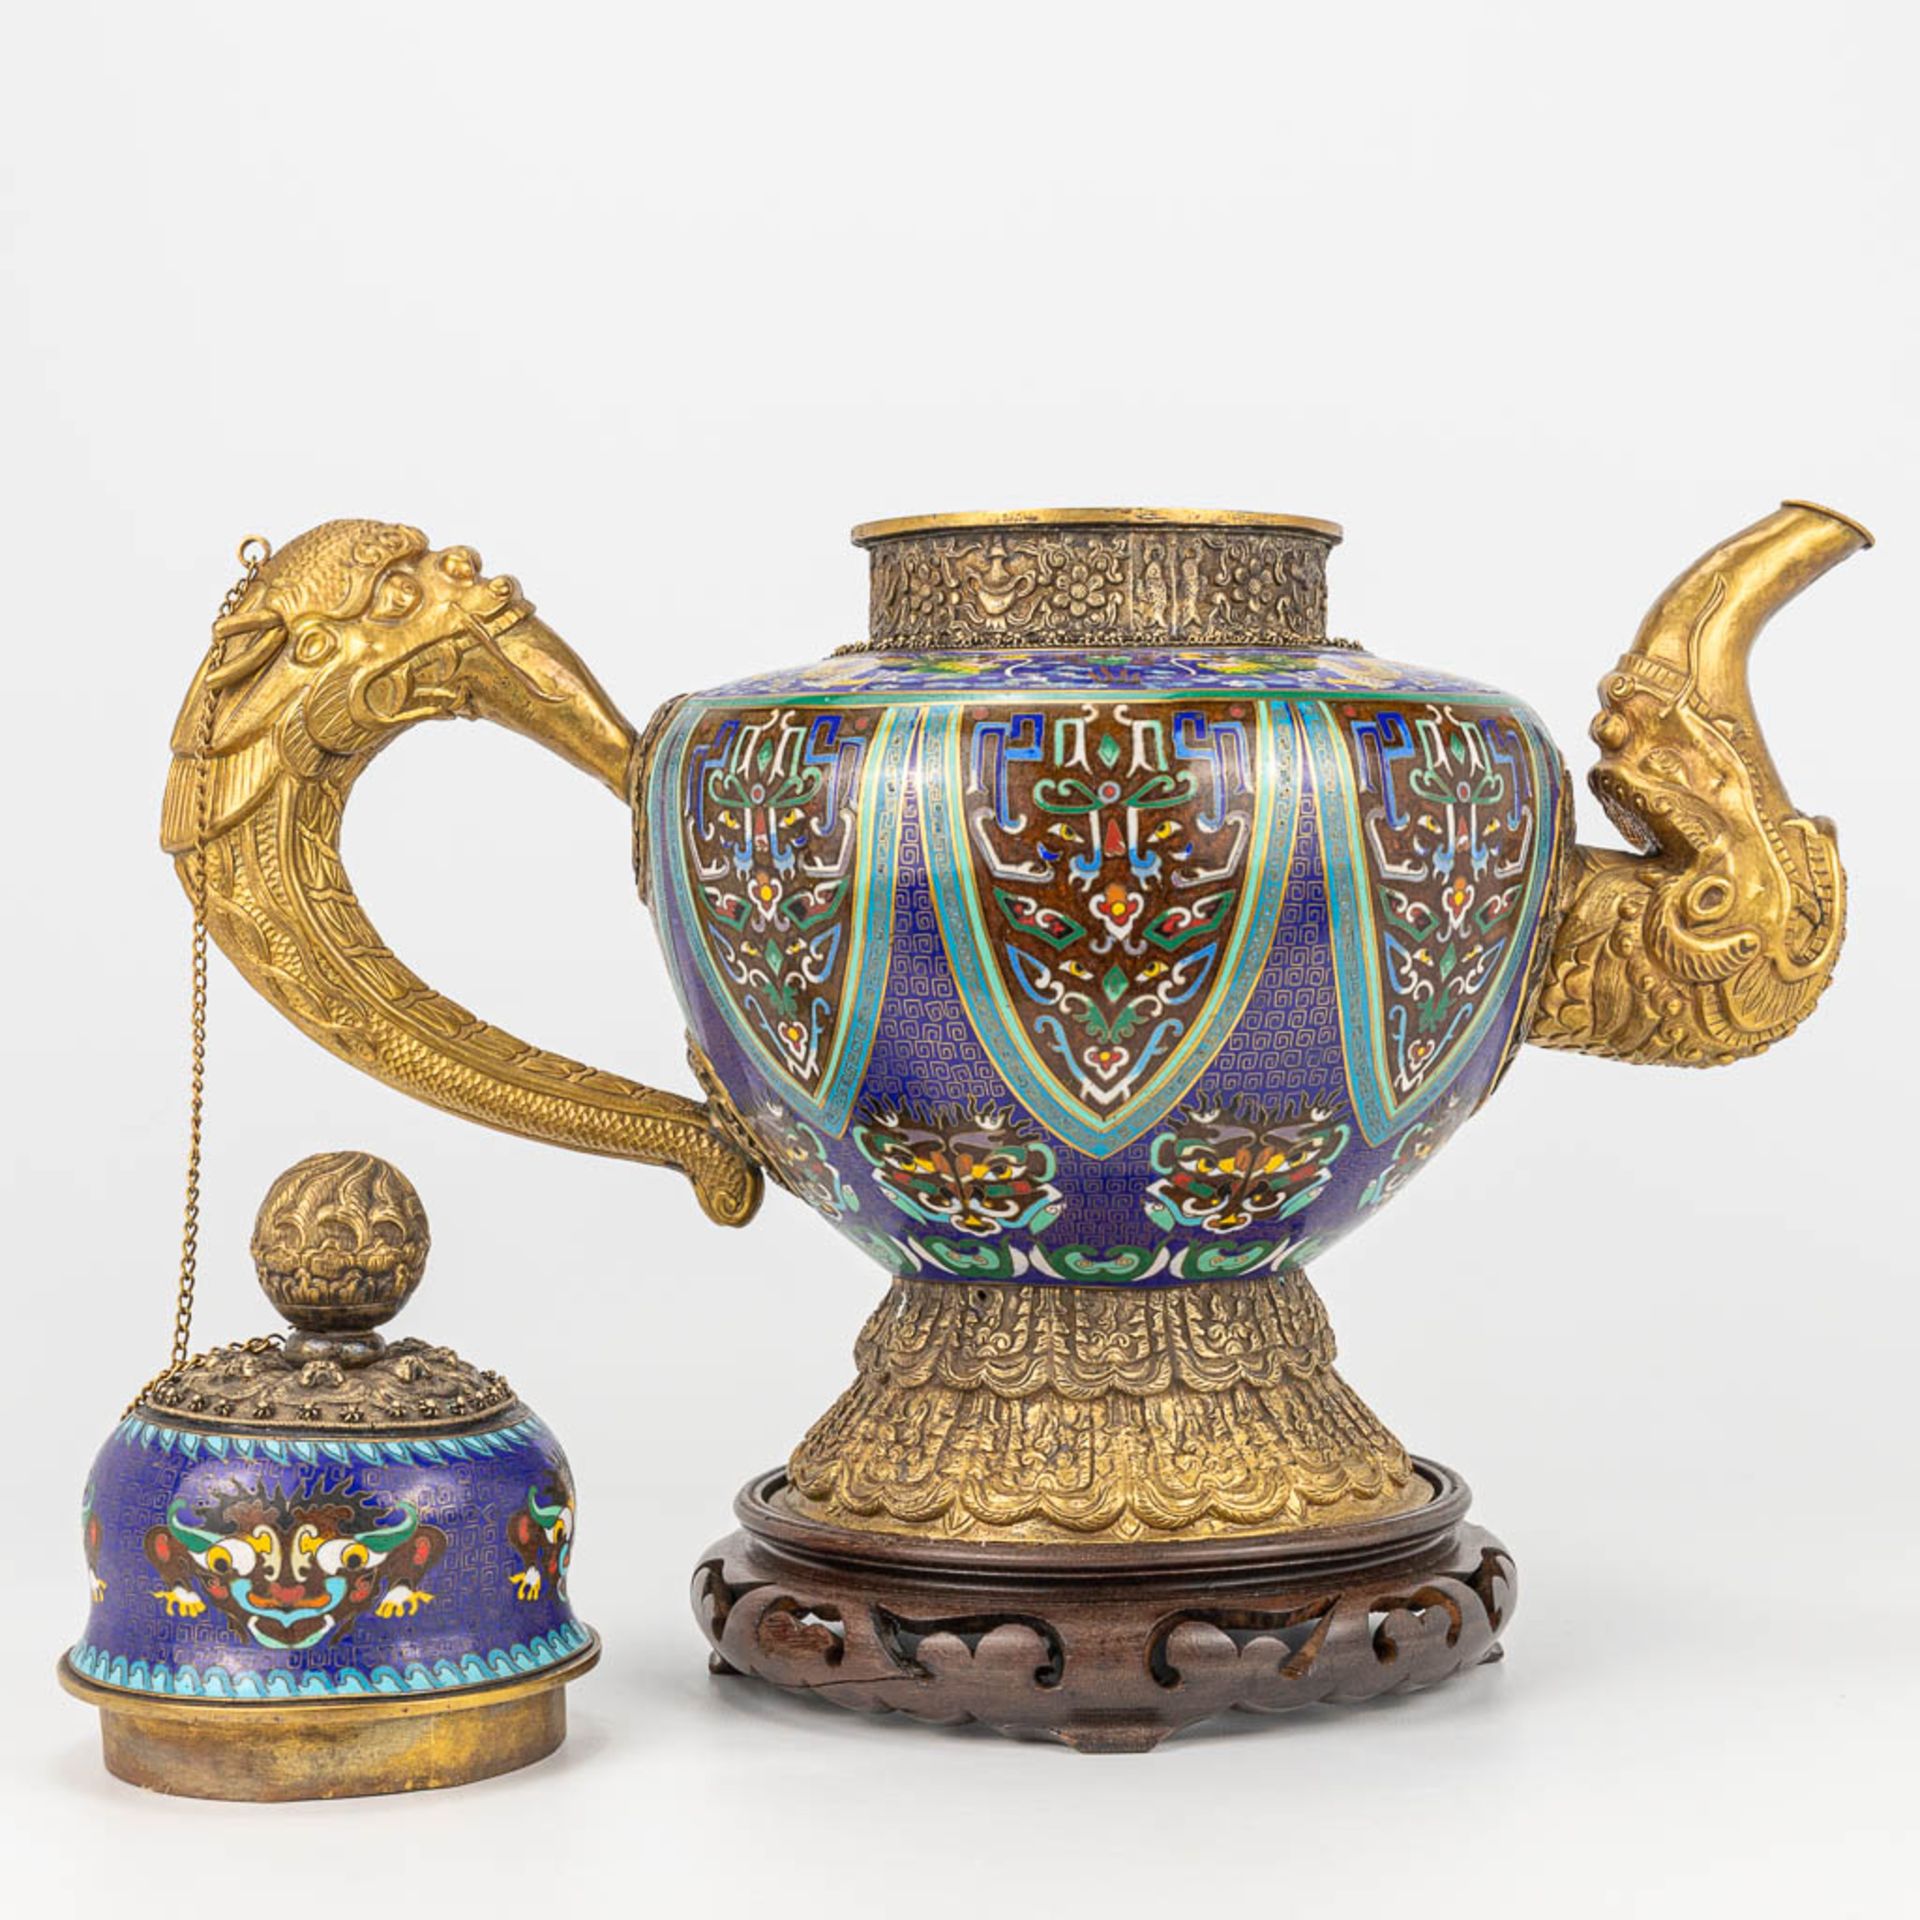 A Tibetan ceremonial ewer made of gilt bronze and finished with cloisonnŽ bronze. - Image 11 of 18